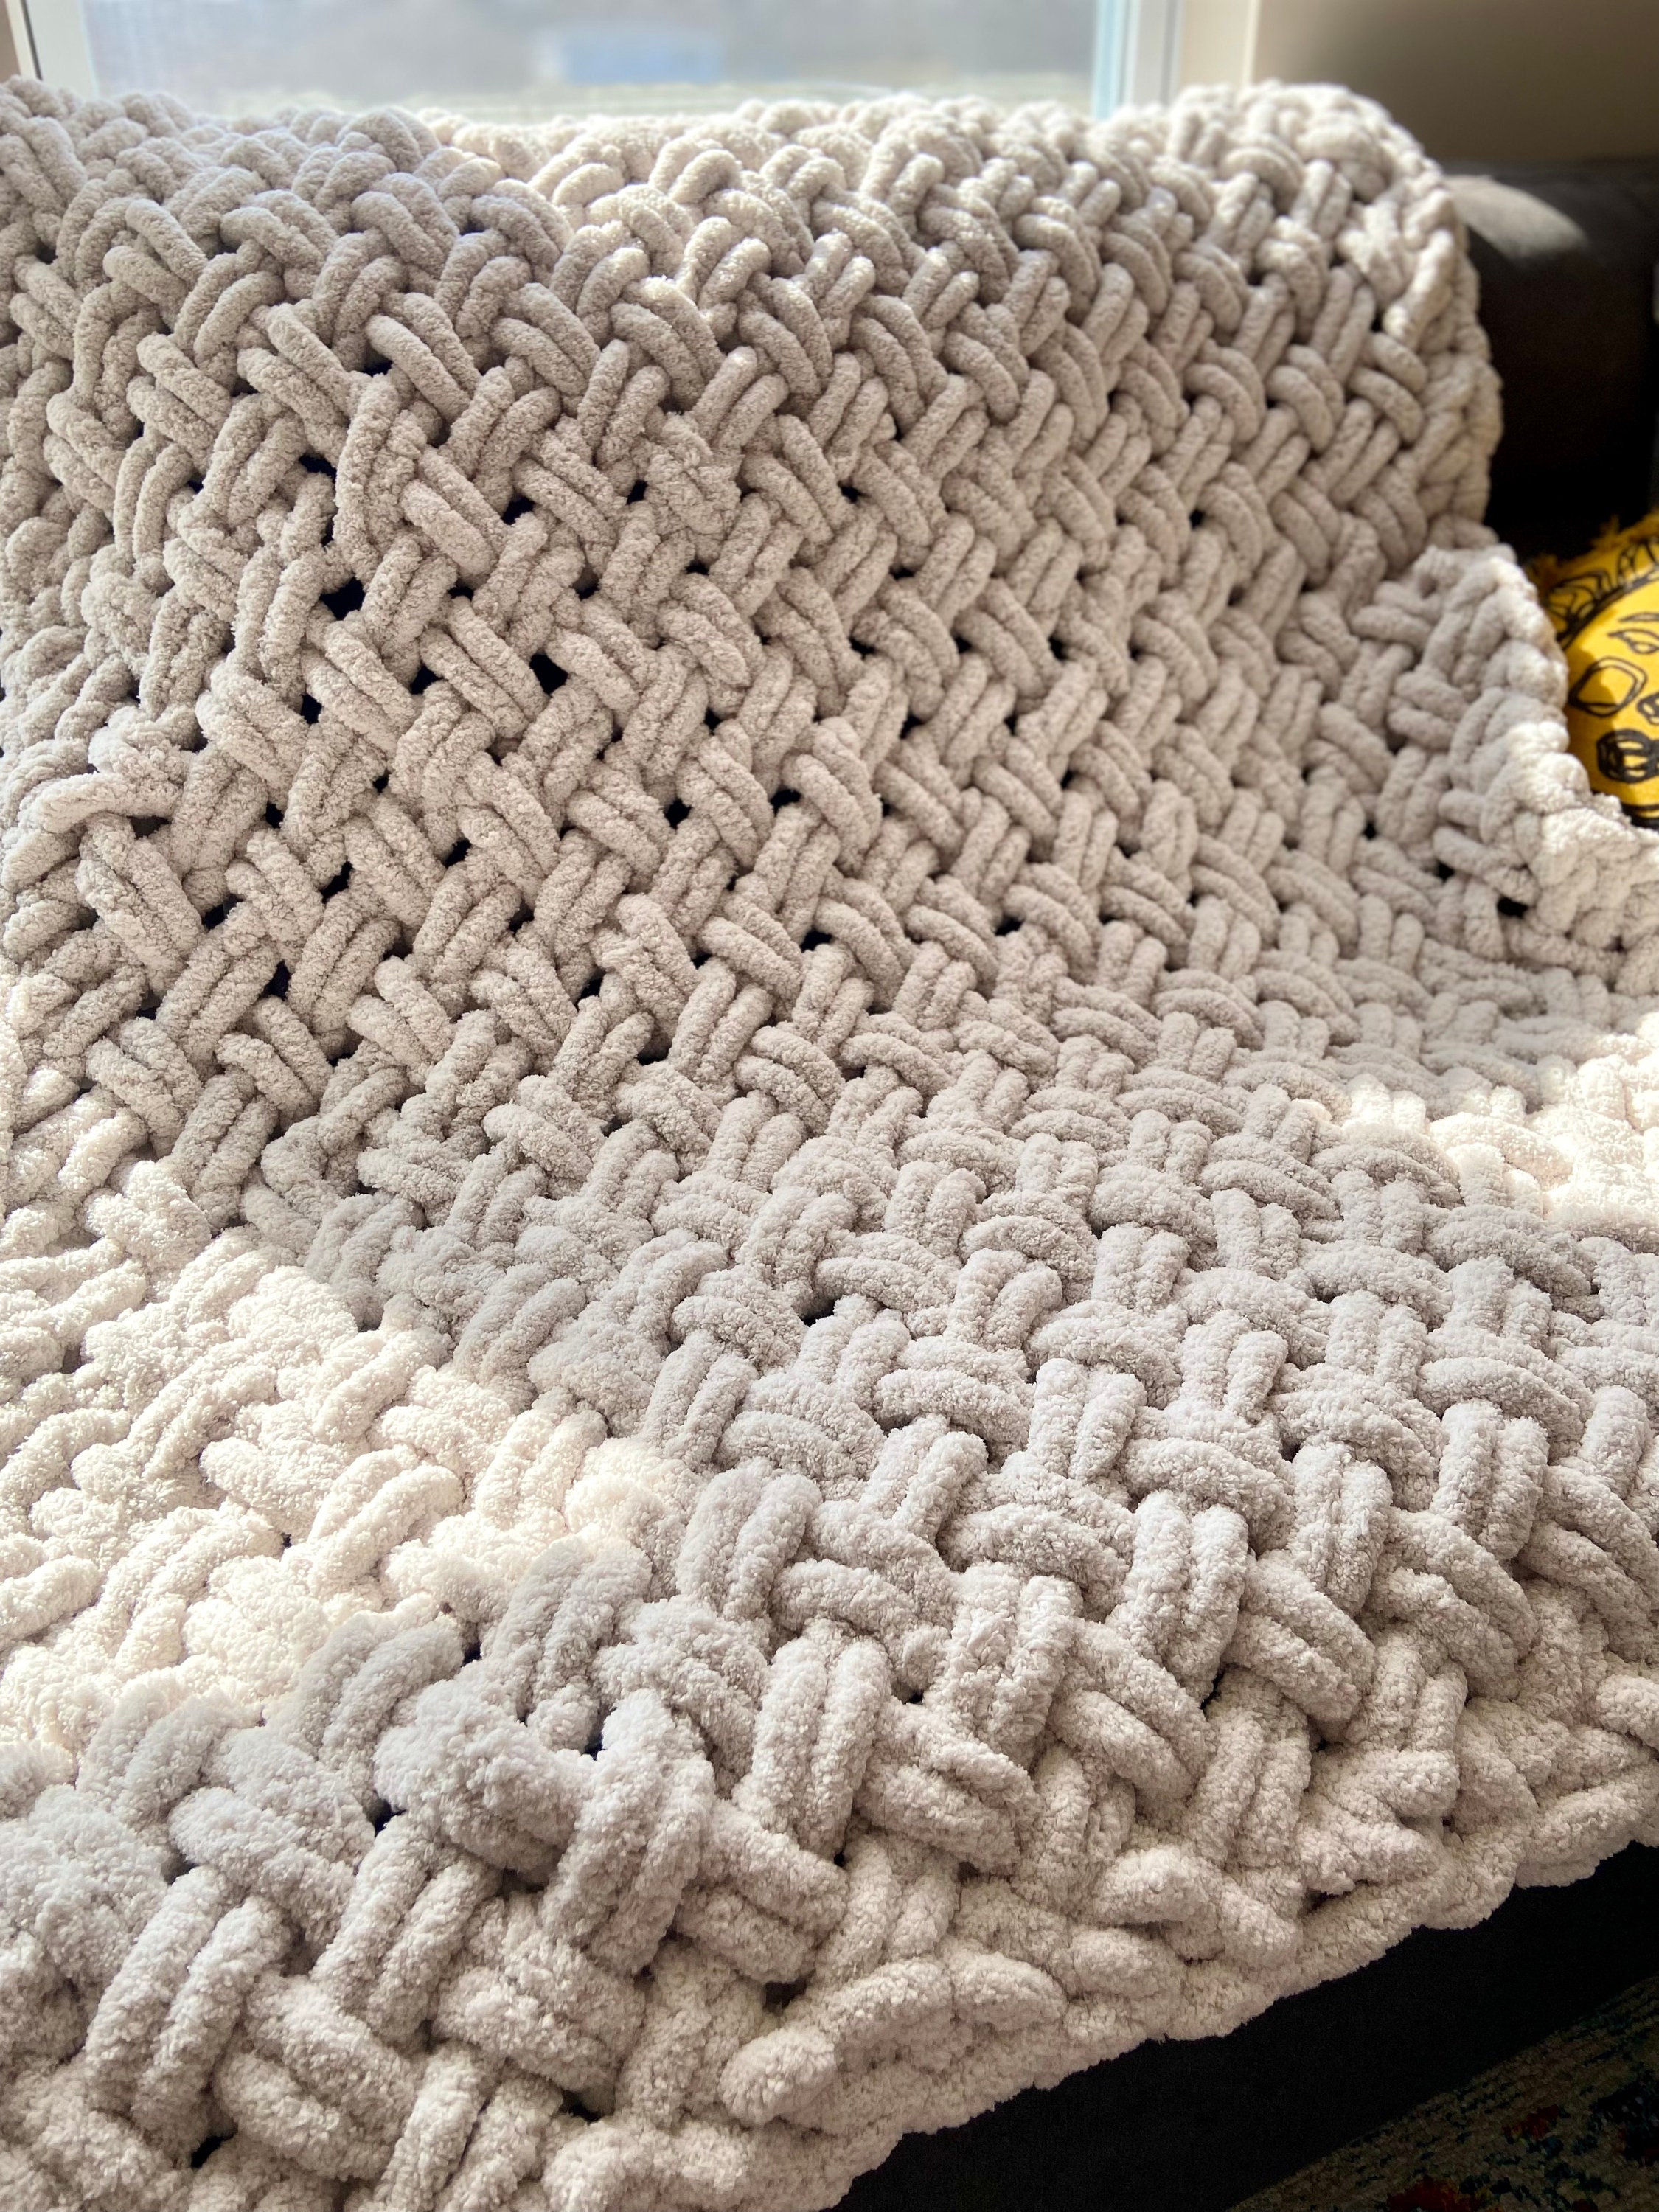 Cozy Criss Cross Stitch Chunky Knit Throw: Textured Basket Weave ...